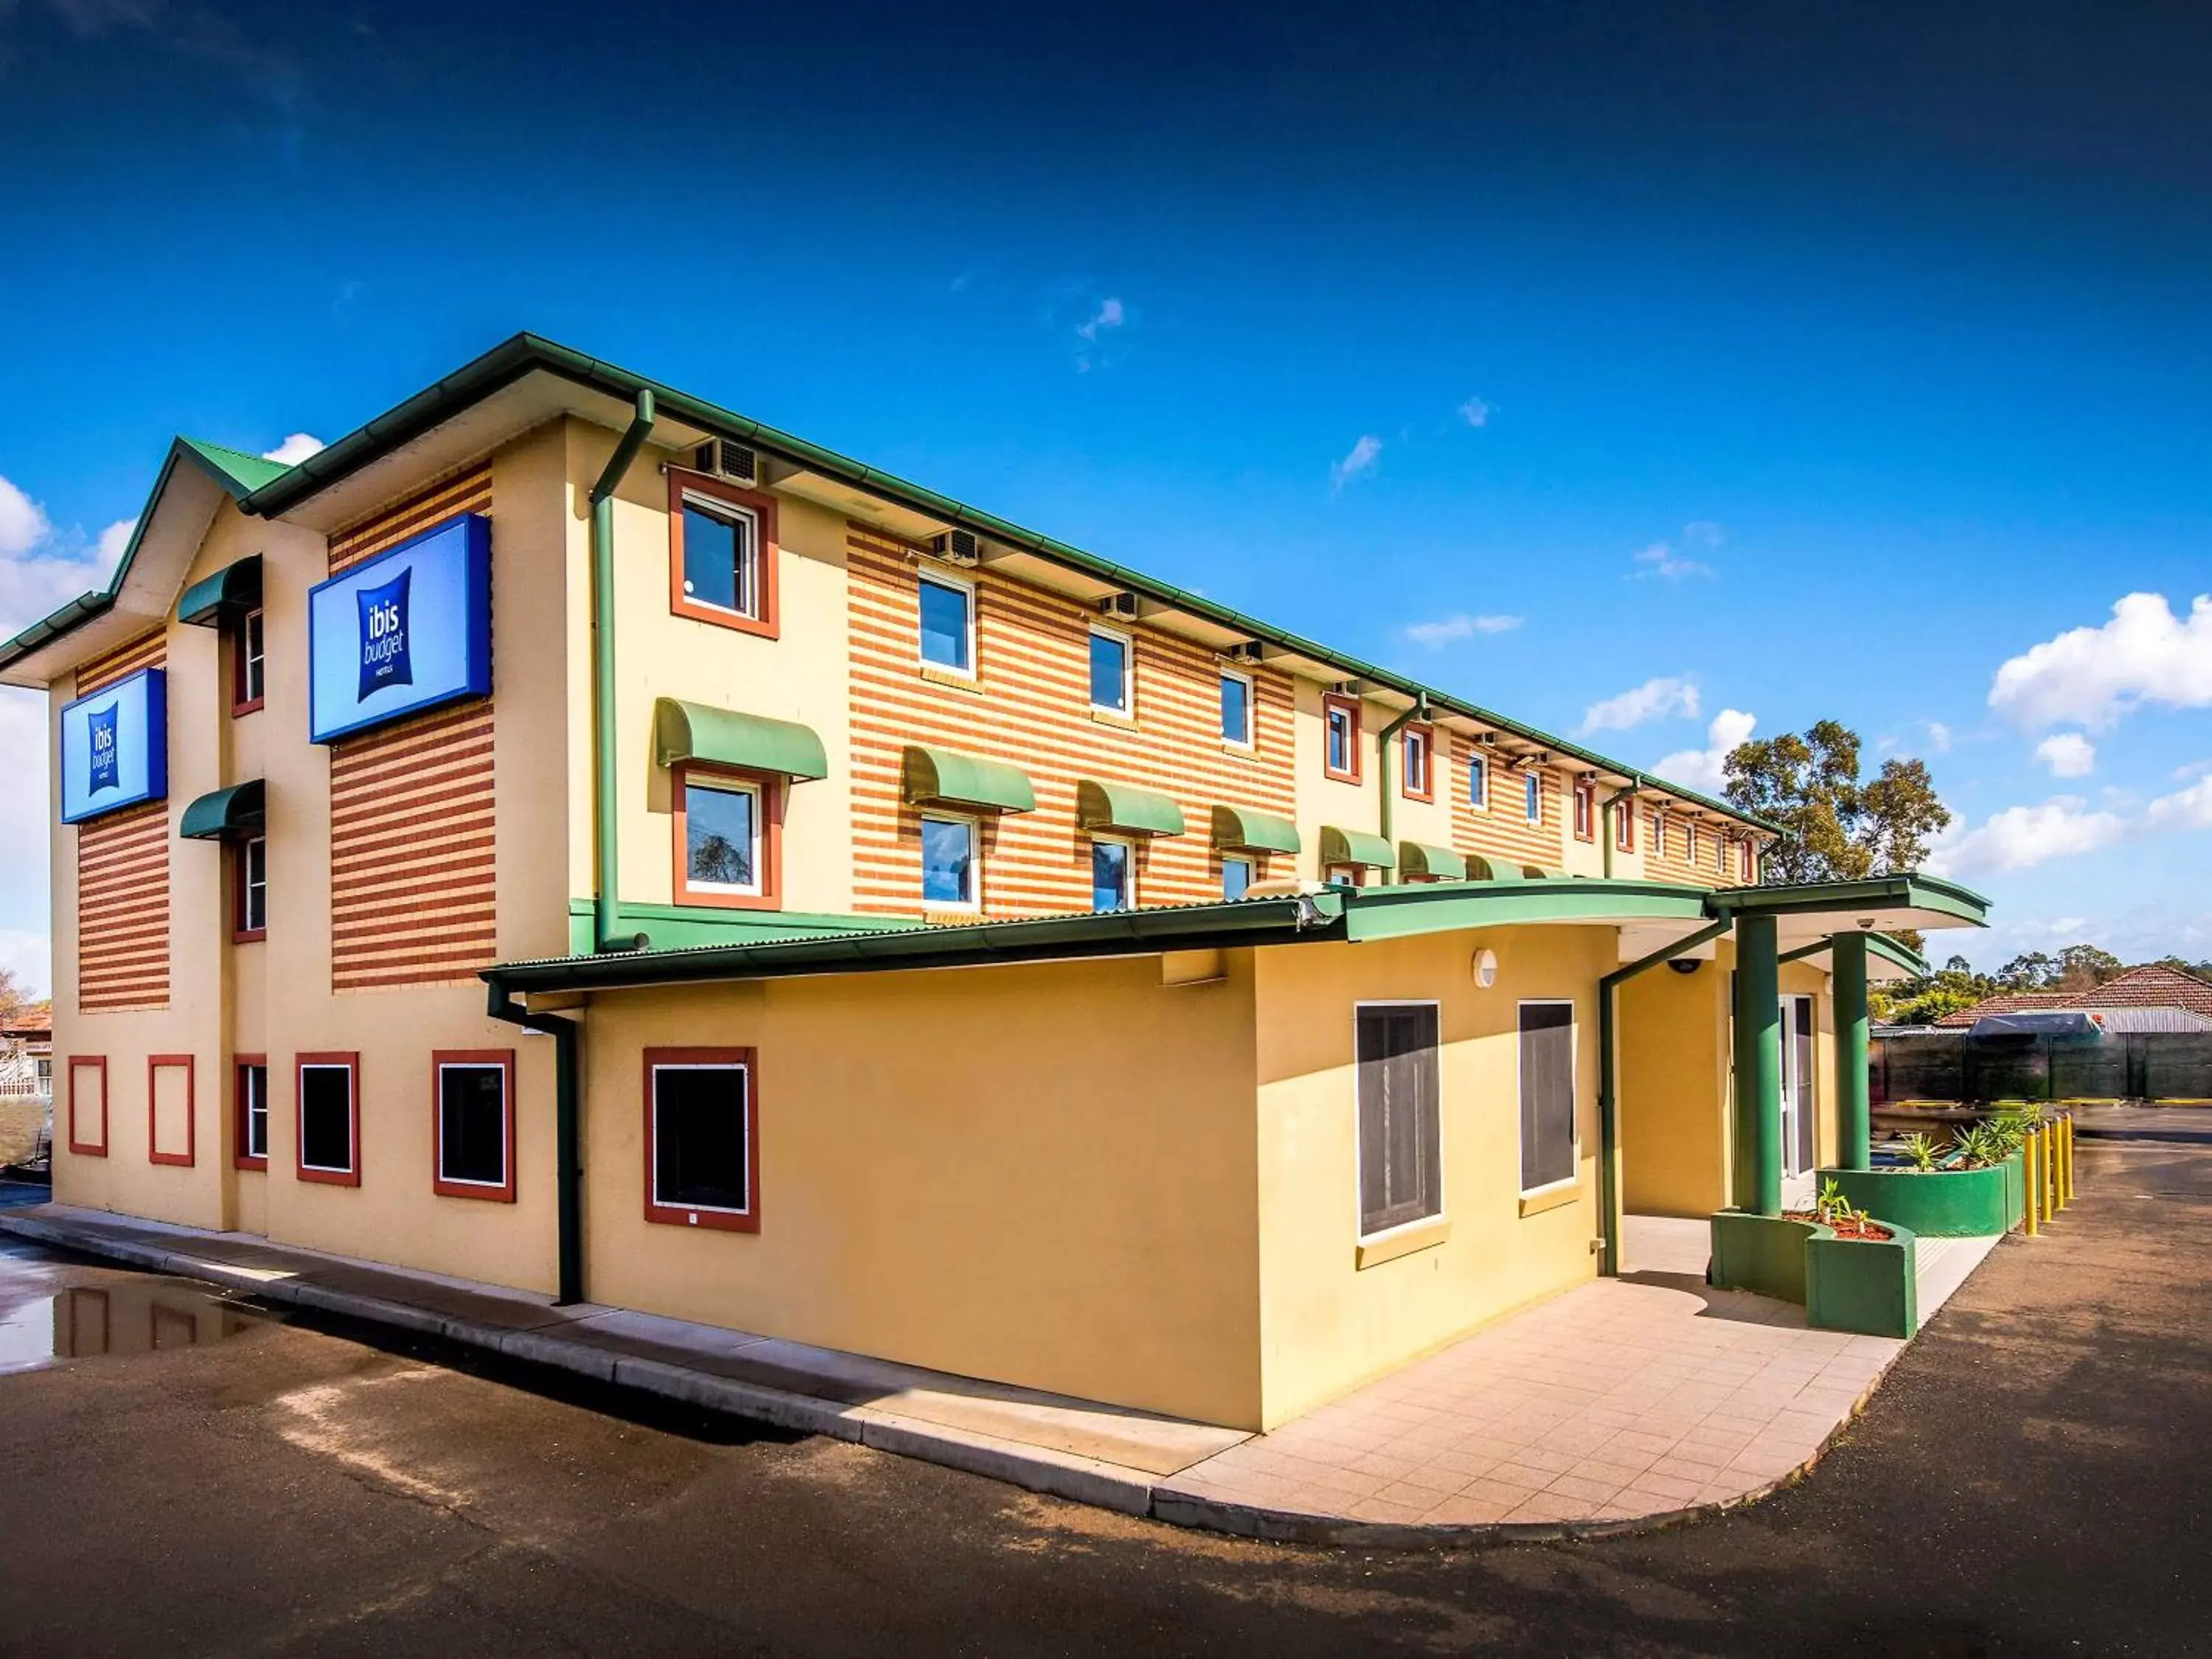 Property Building in Ibis Budget - Casula Liverpool